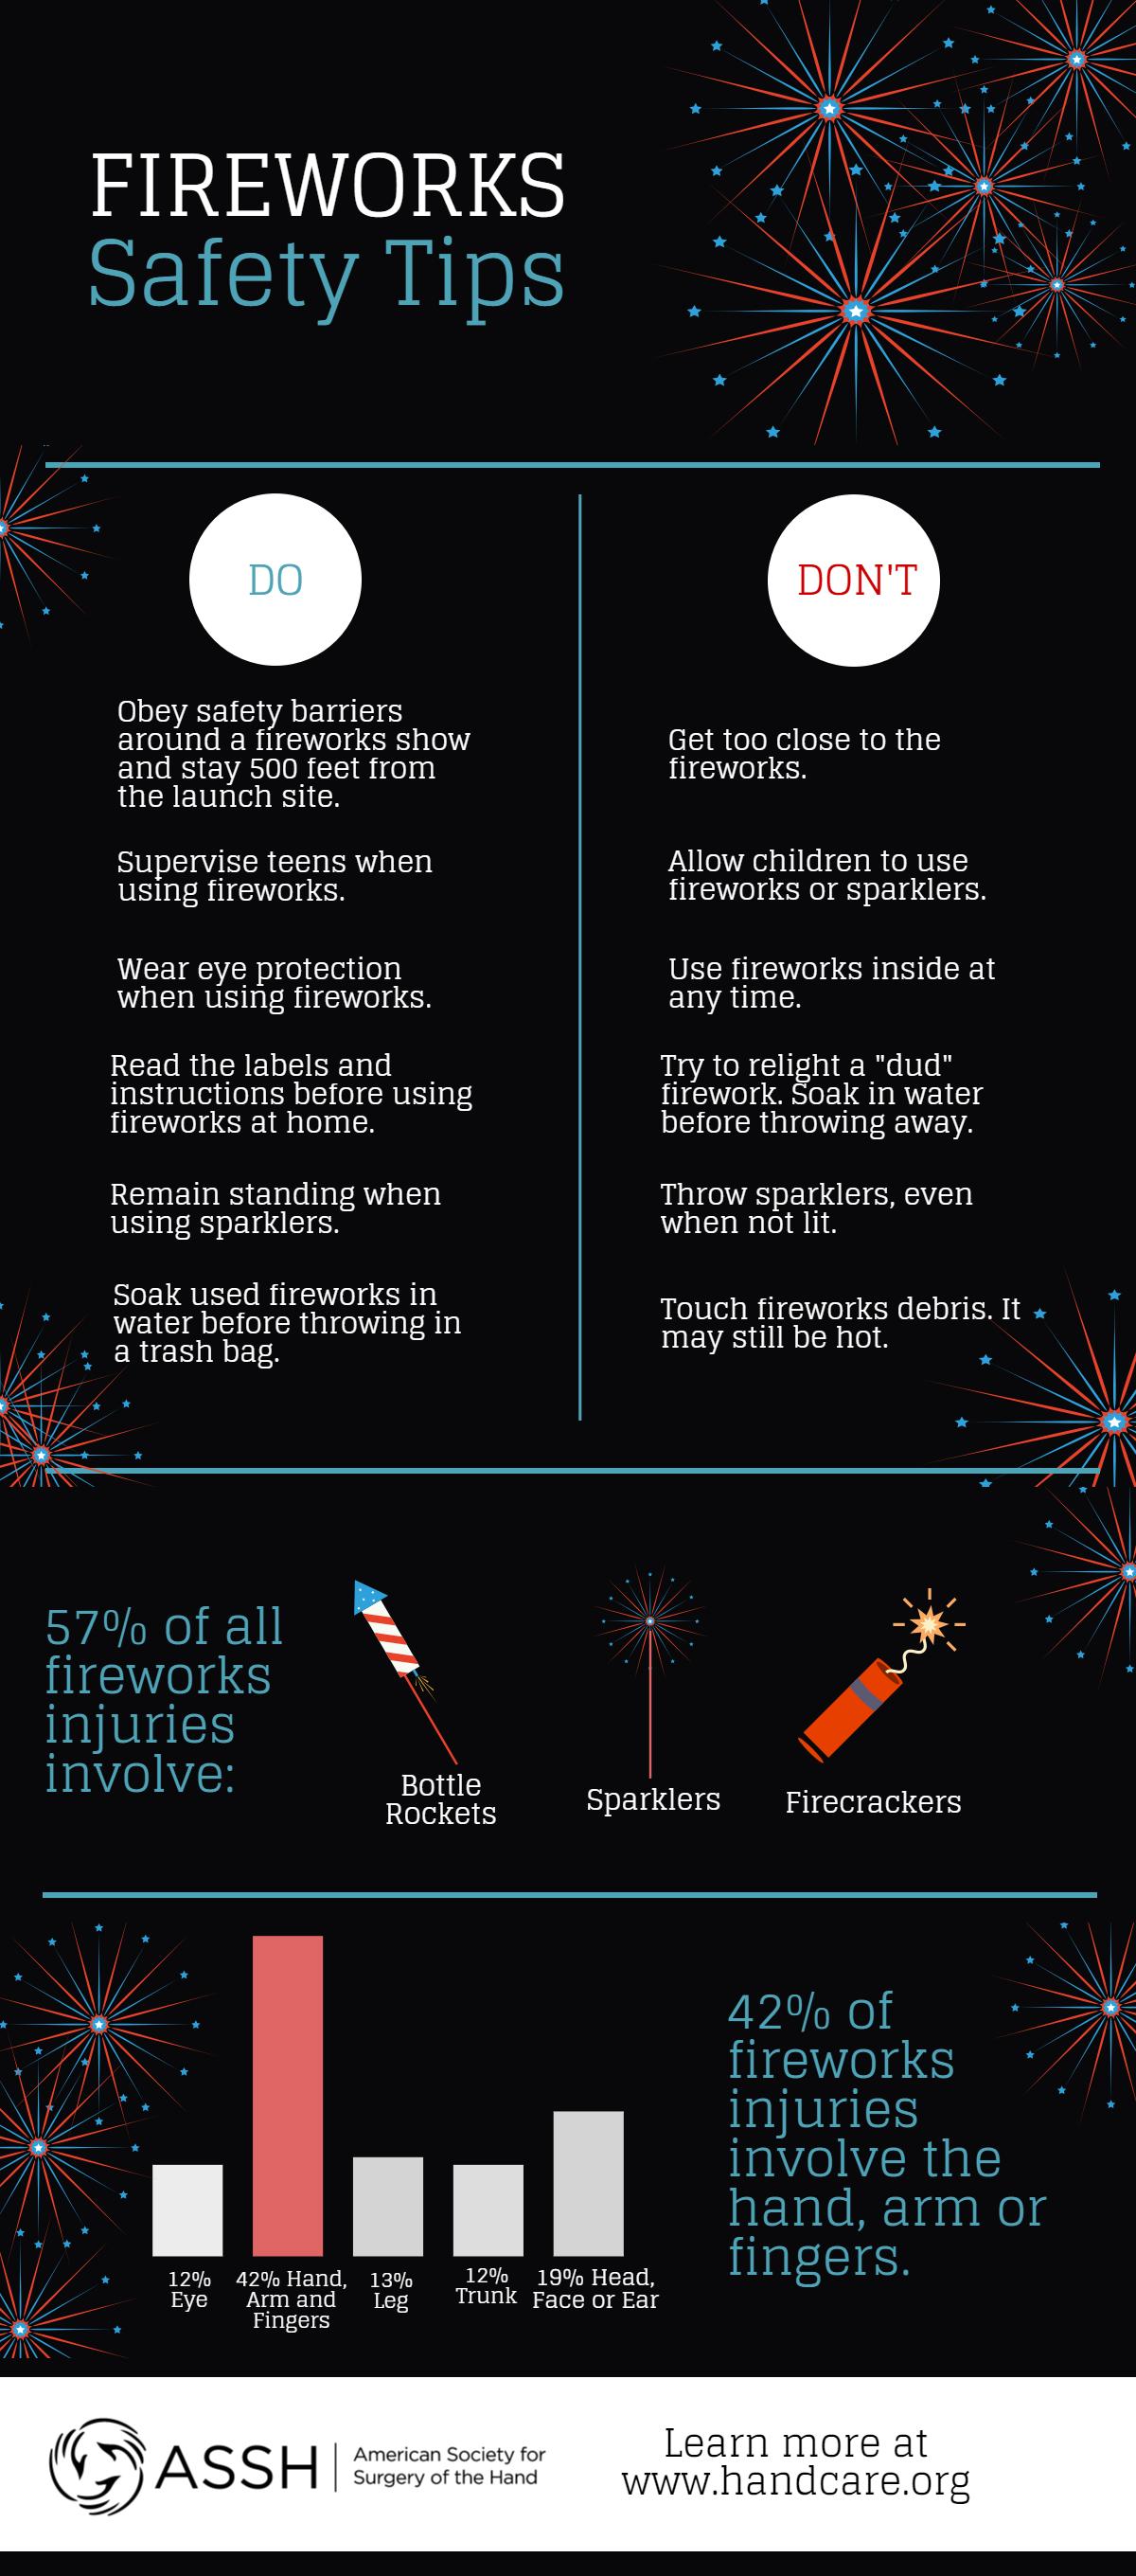 How to Use Fireworks Safely The Hand Society